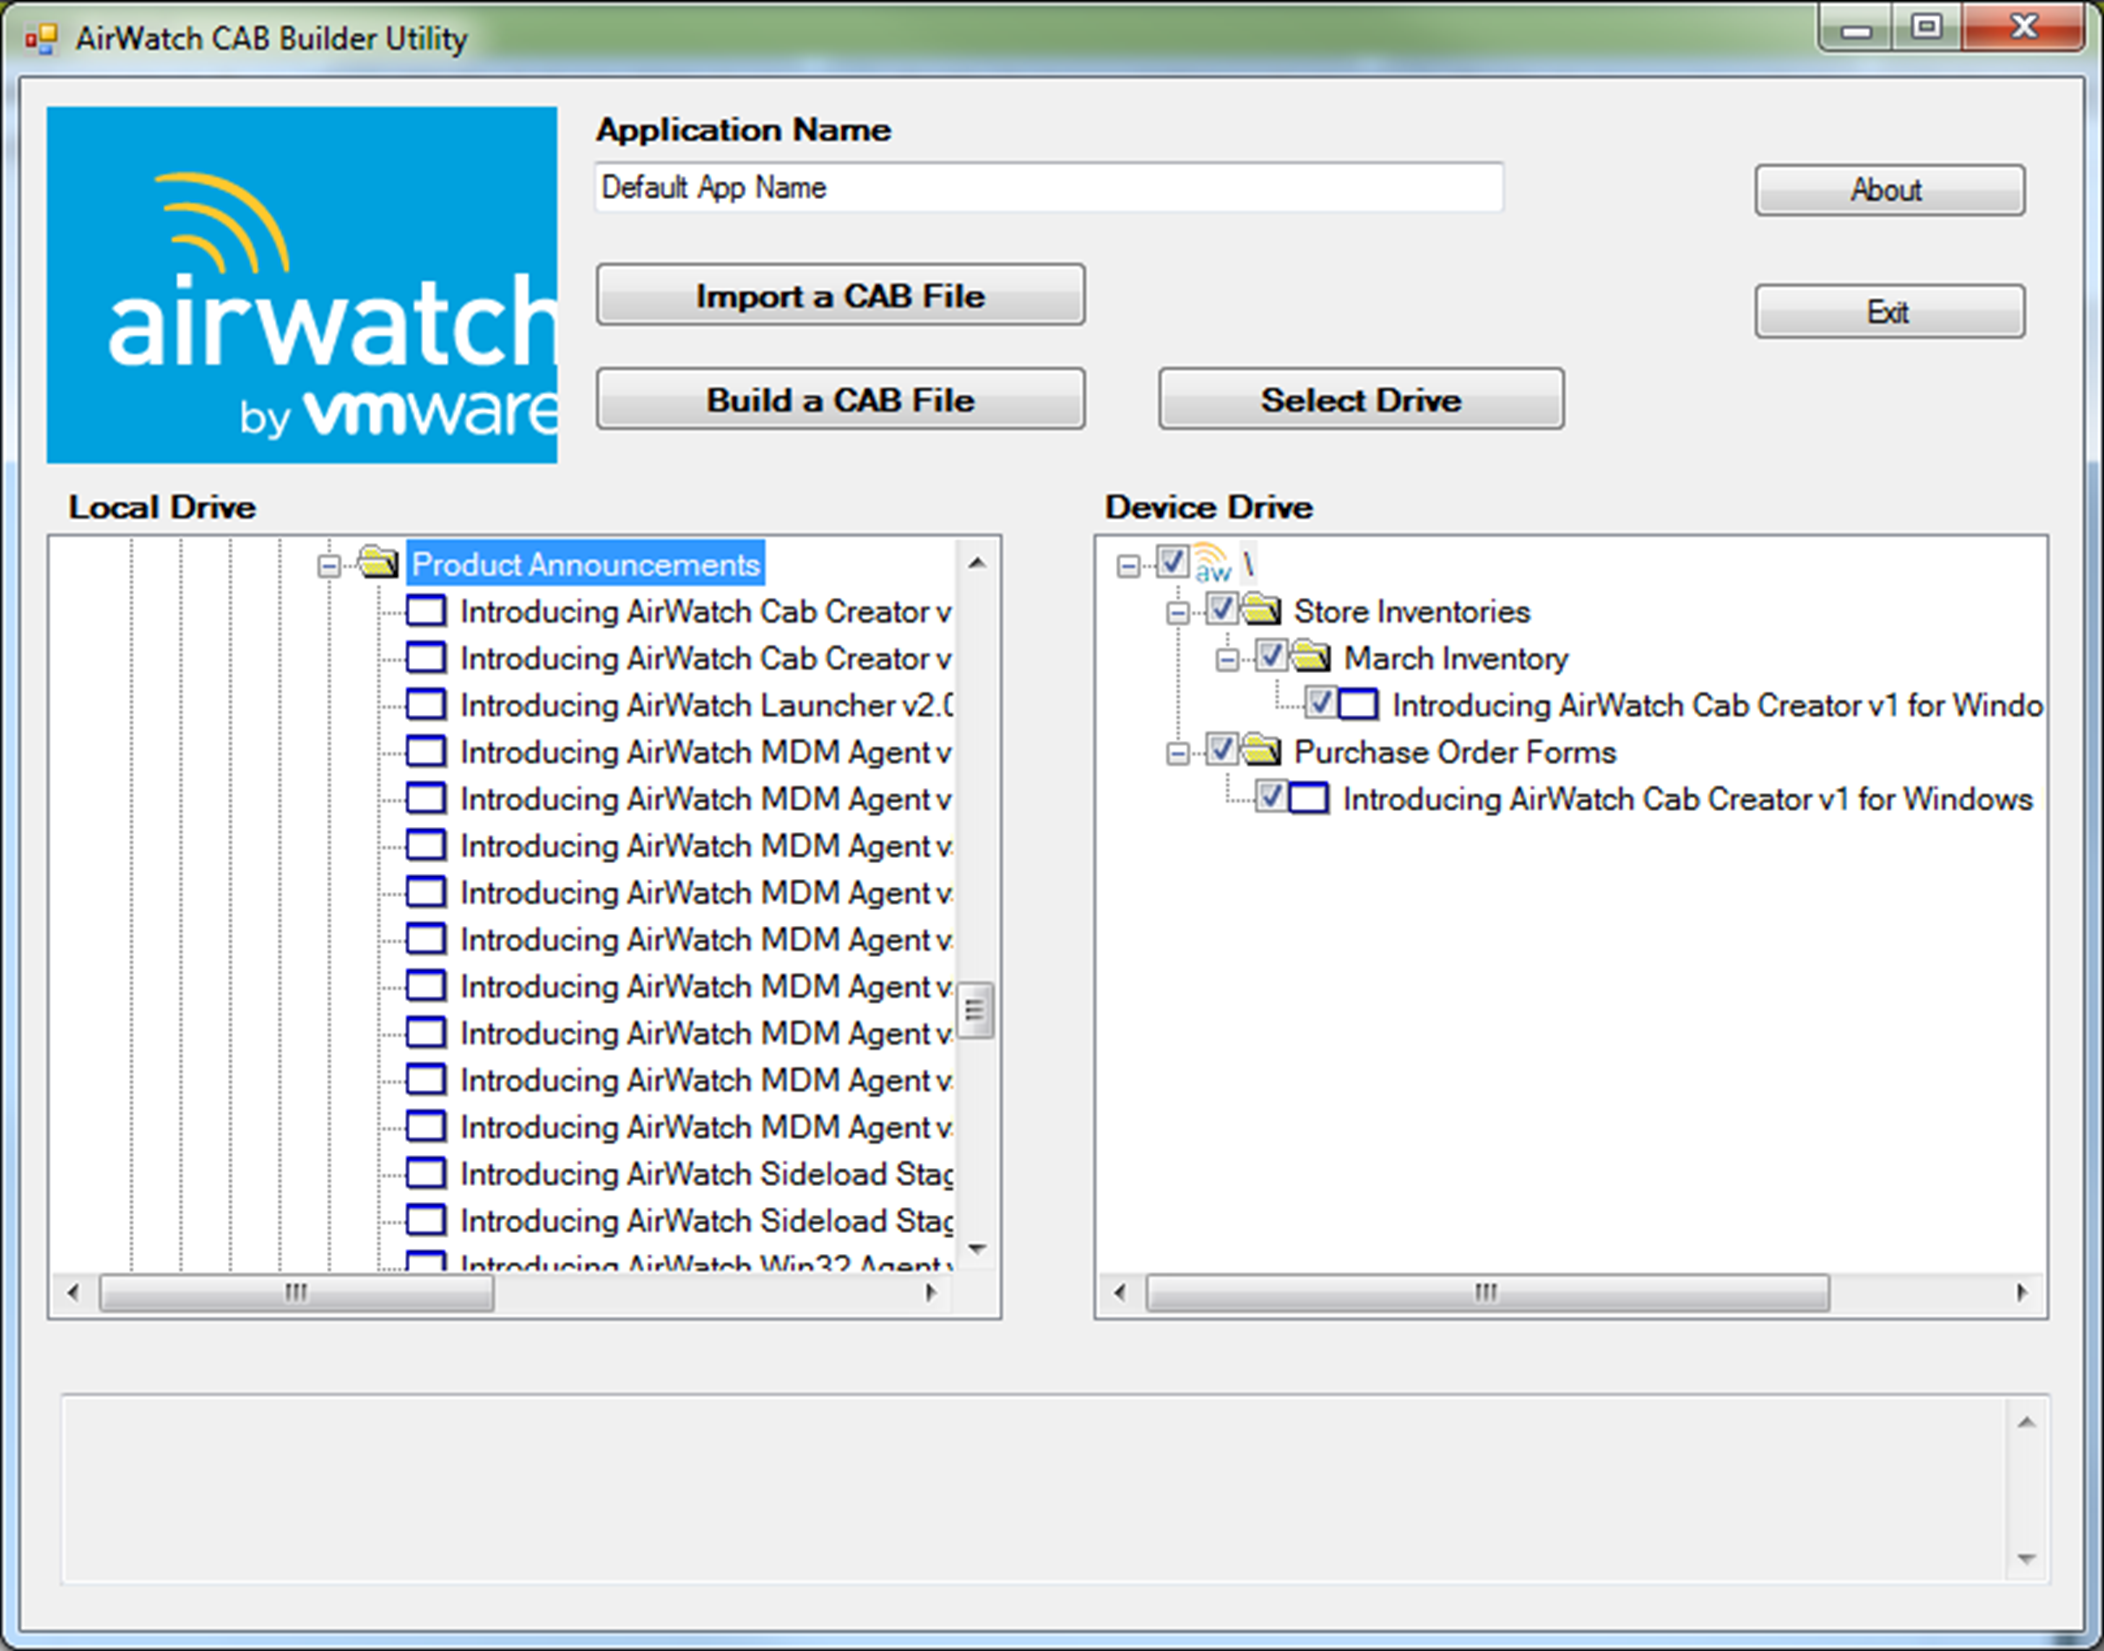 This screenshot shows the AirWatch CAB Builder Utility, which enables you to make your own CAB files to install onto Windows Rugged devices.